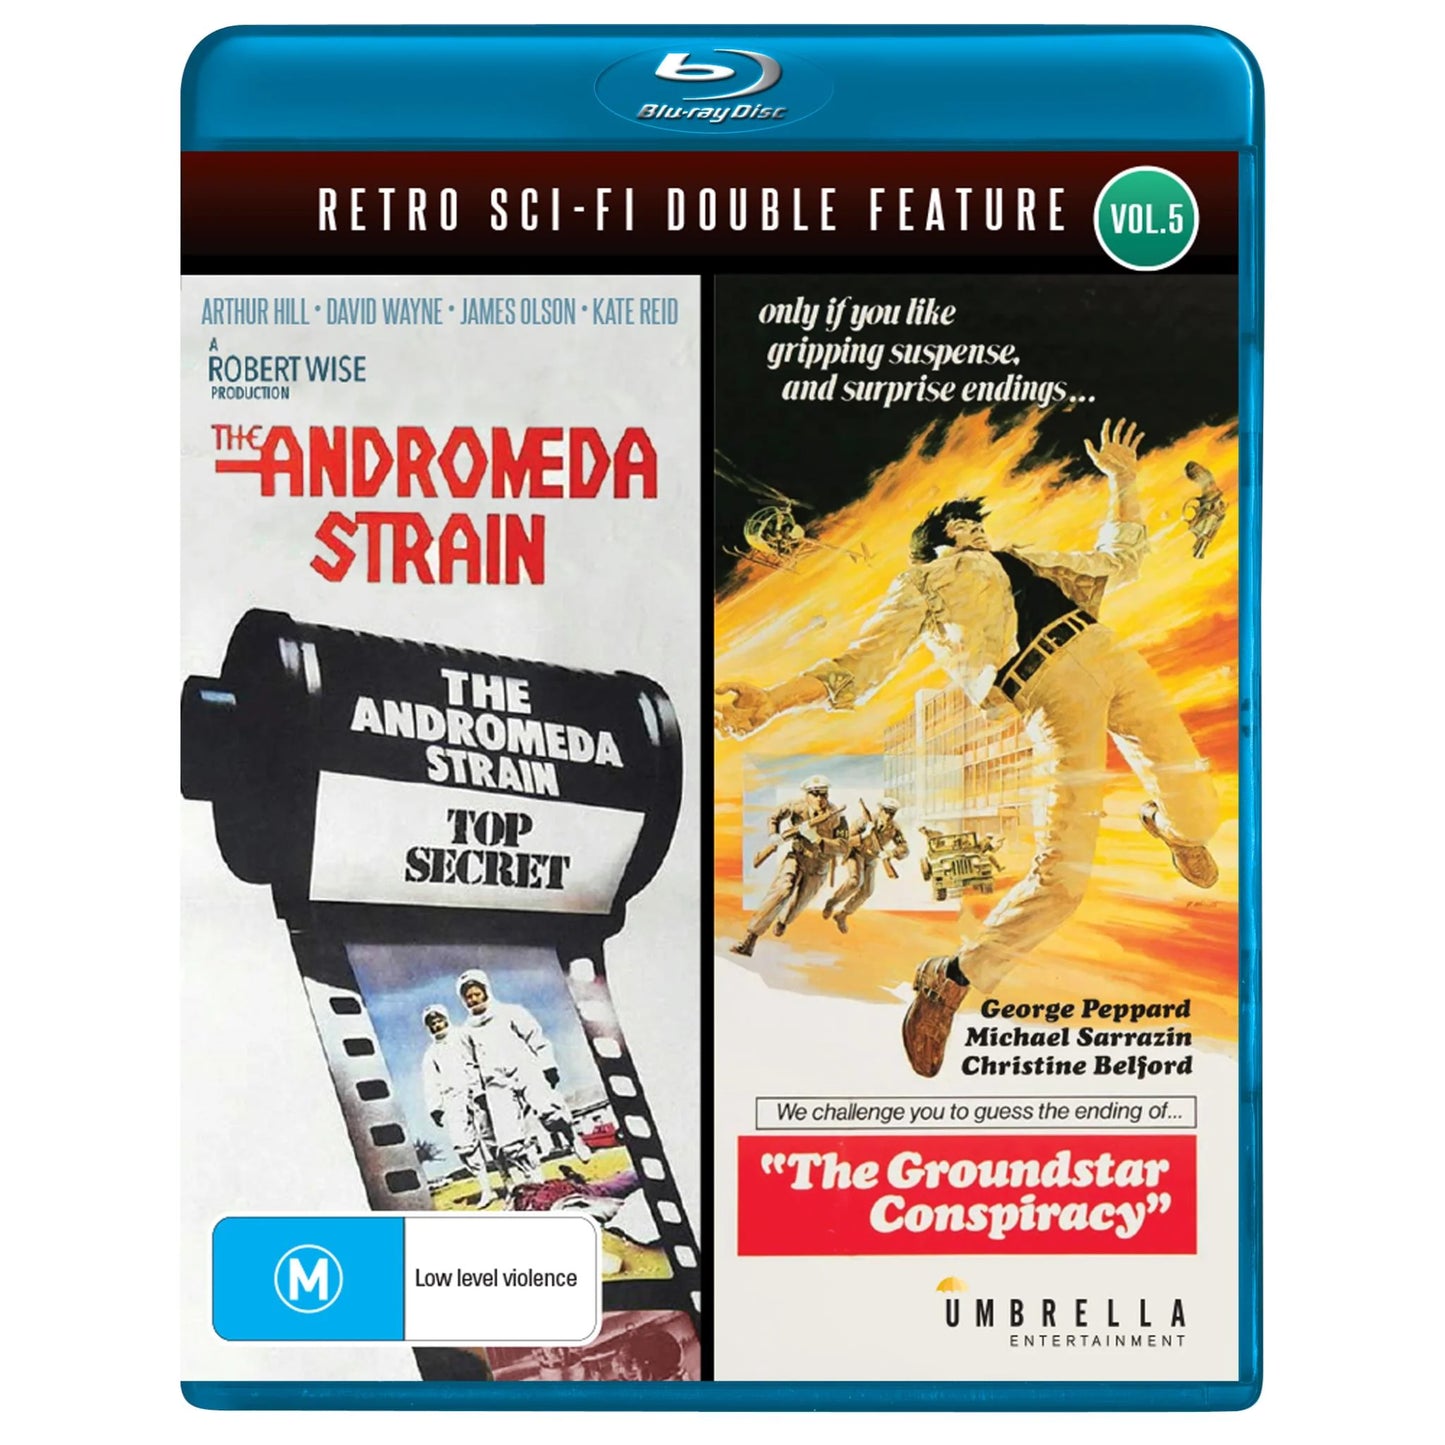 Retro Sci-Fi Double Feature Vol 5: The Andromeda Strain & The Groundstar Conspiracy Blu-Ray